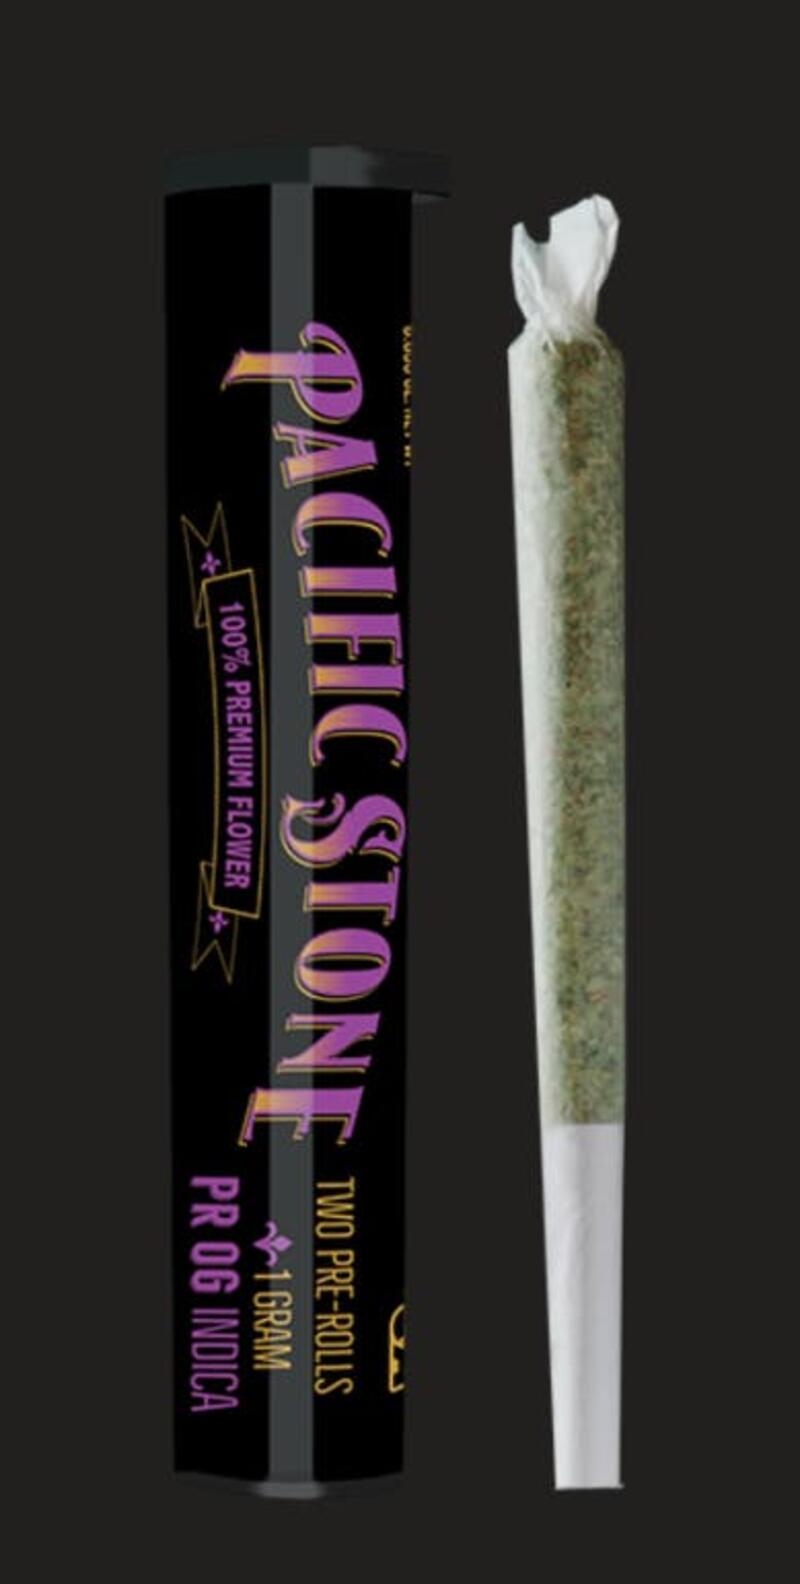 Pacific Stone: Private Reserve OG (2 Pack Pre-Rolls)